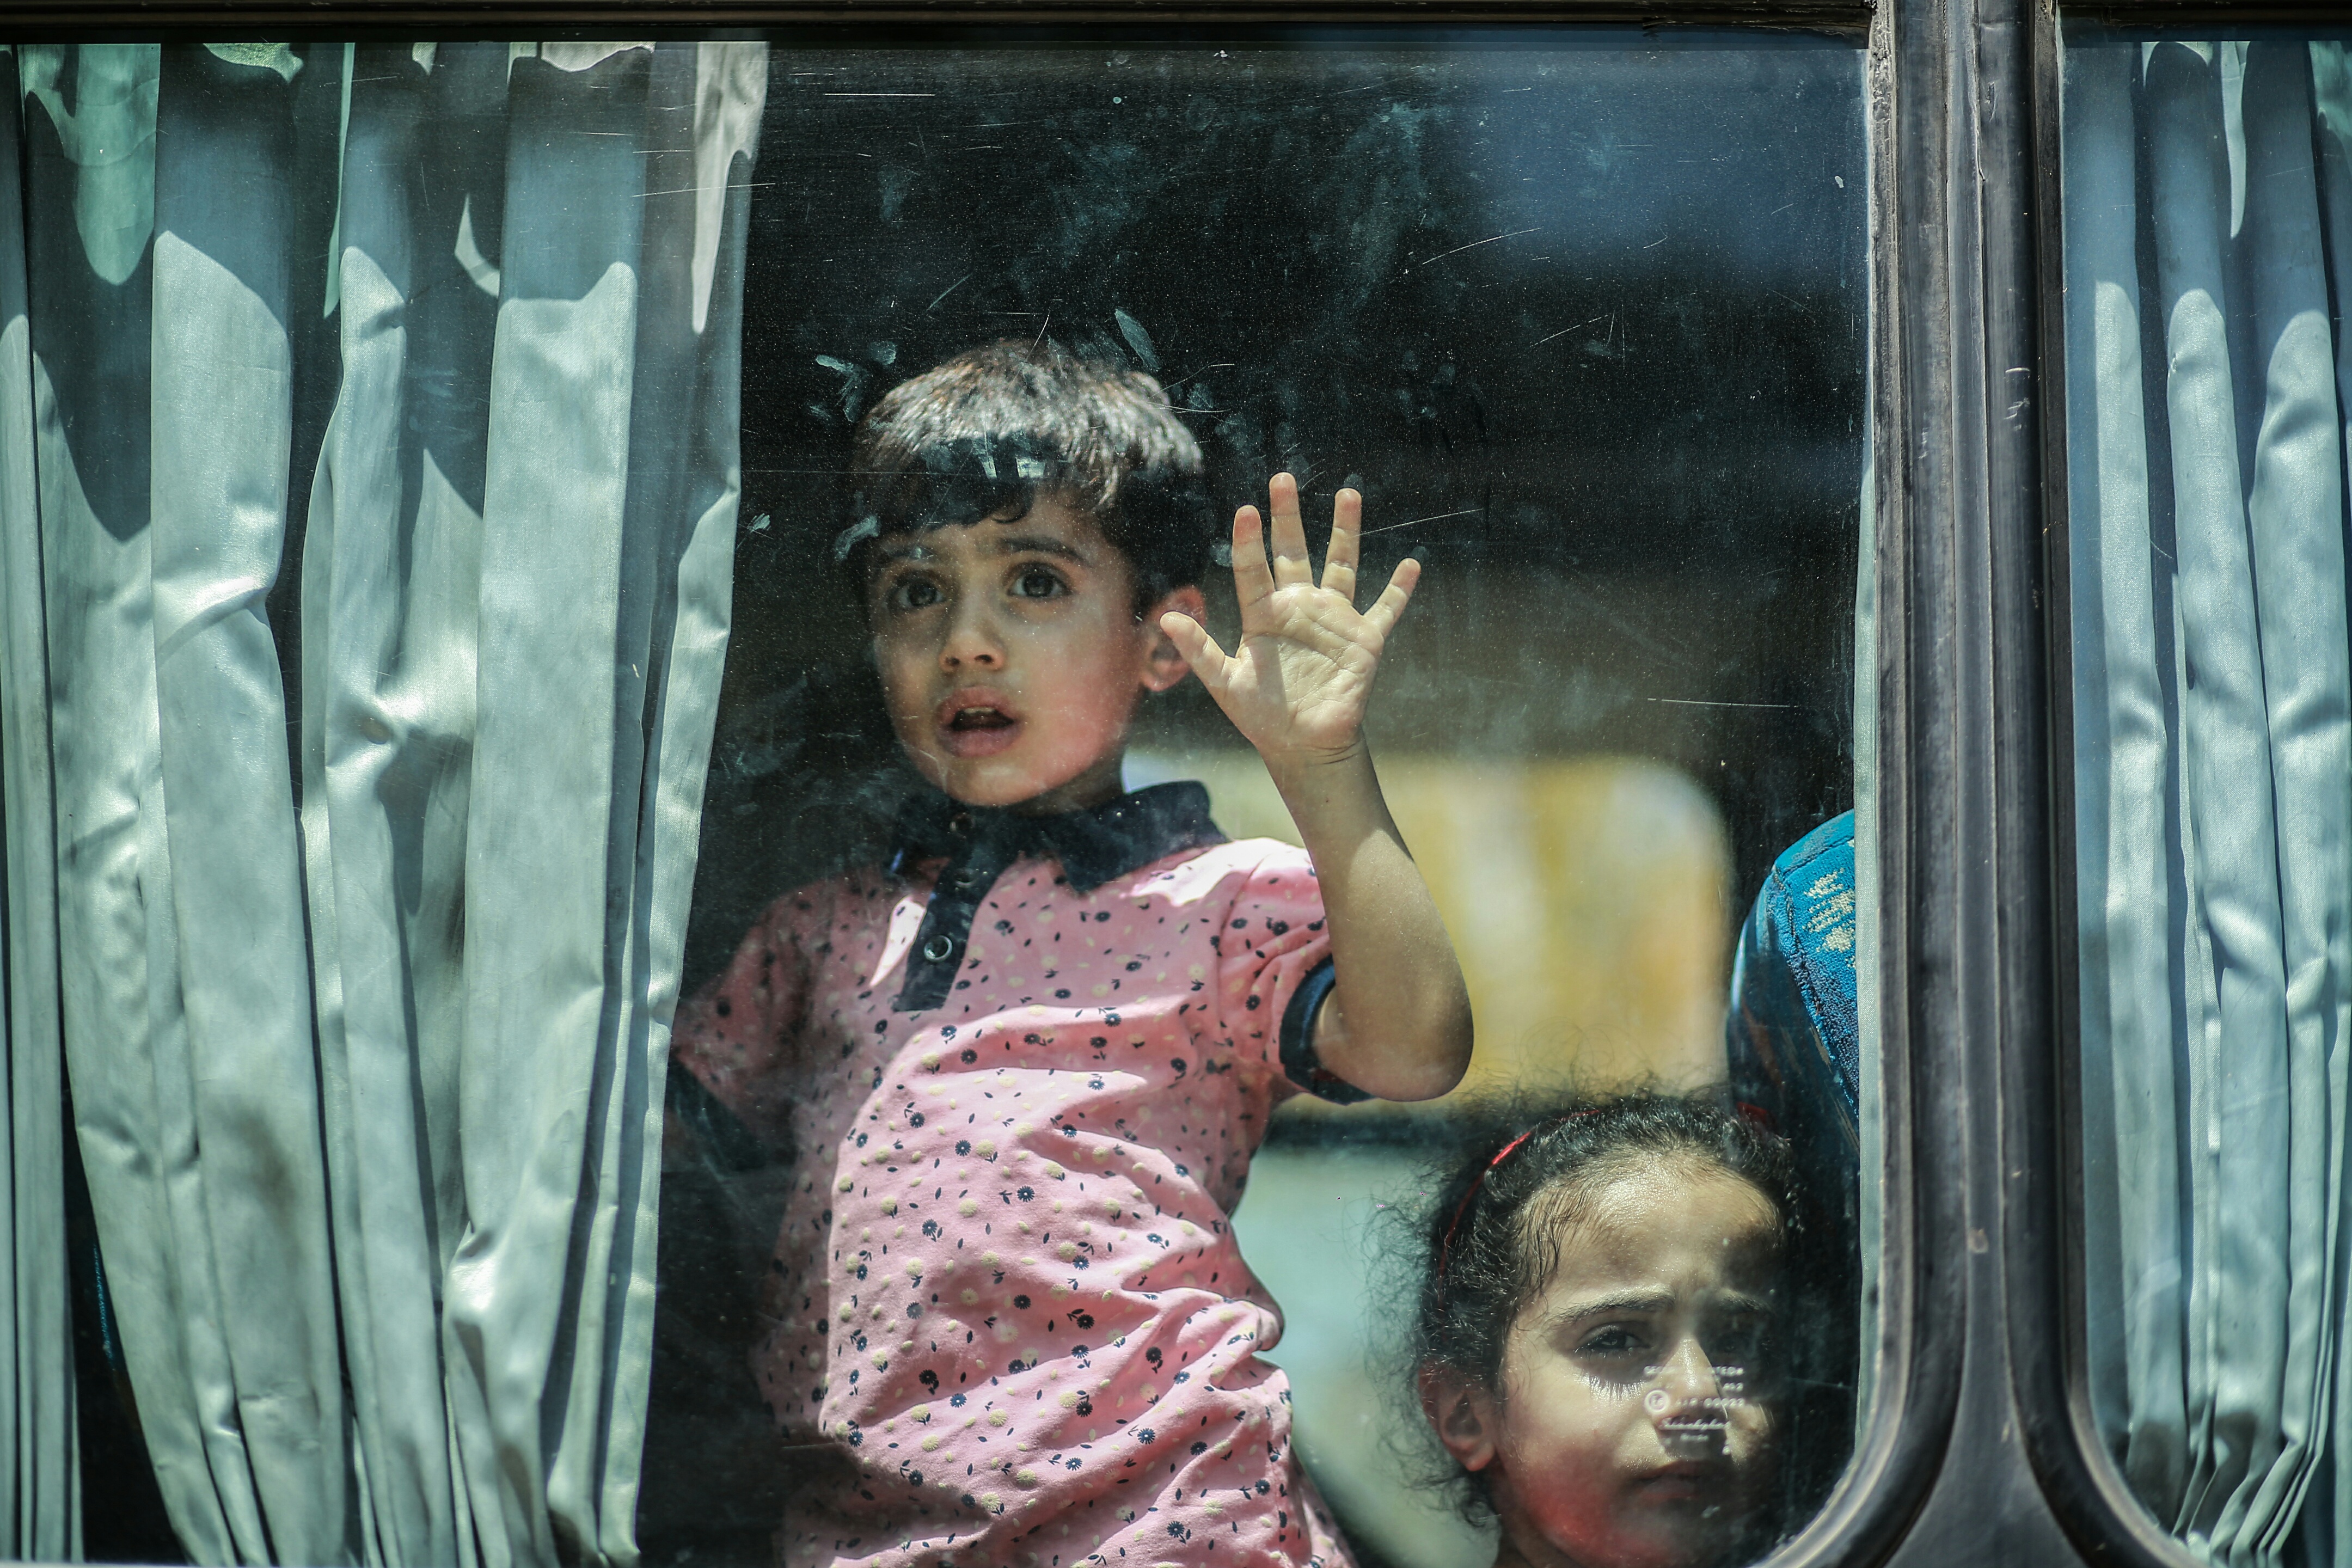 A boy from Gaza looks out the window of the bus on the way to the Egyptian border